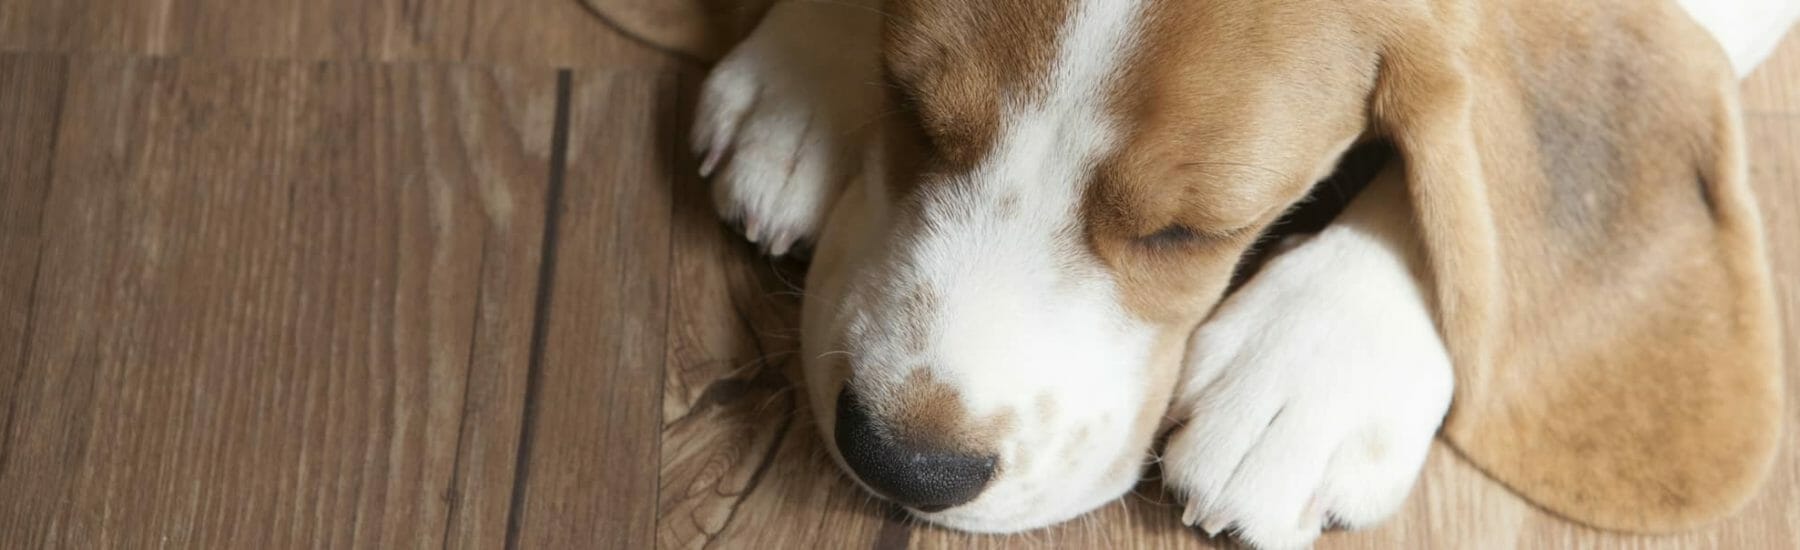 acupuncture for pets